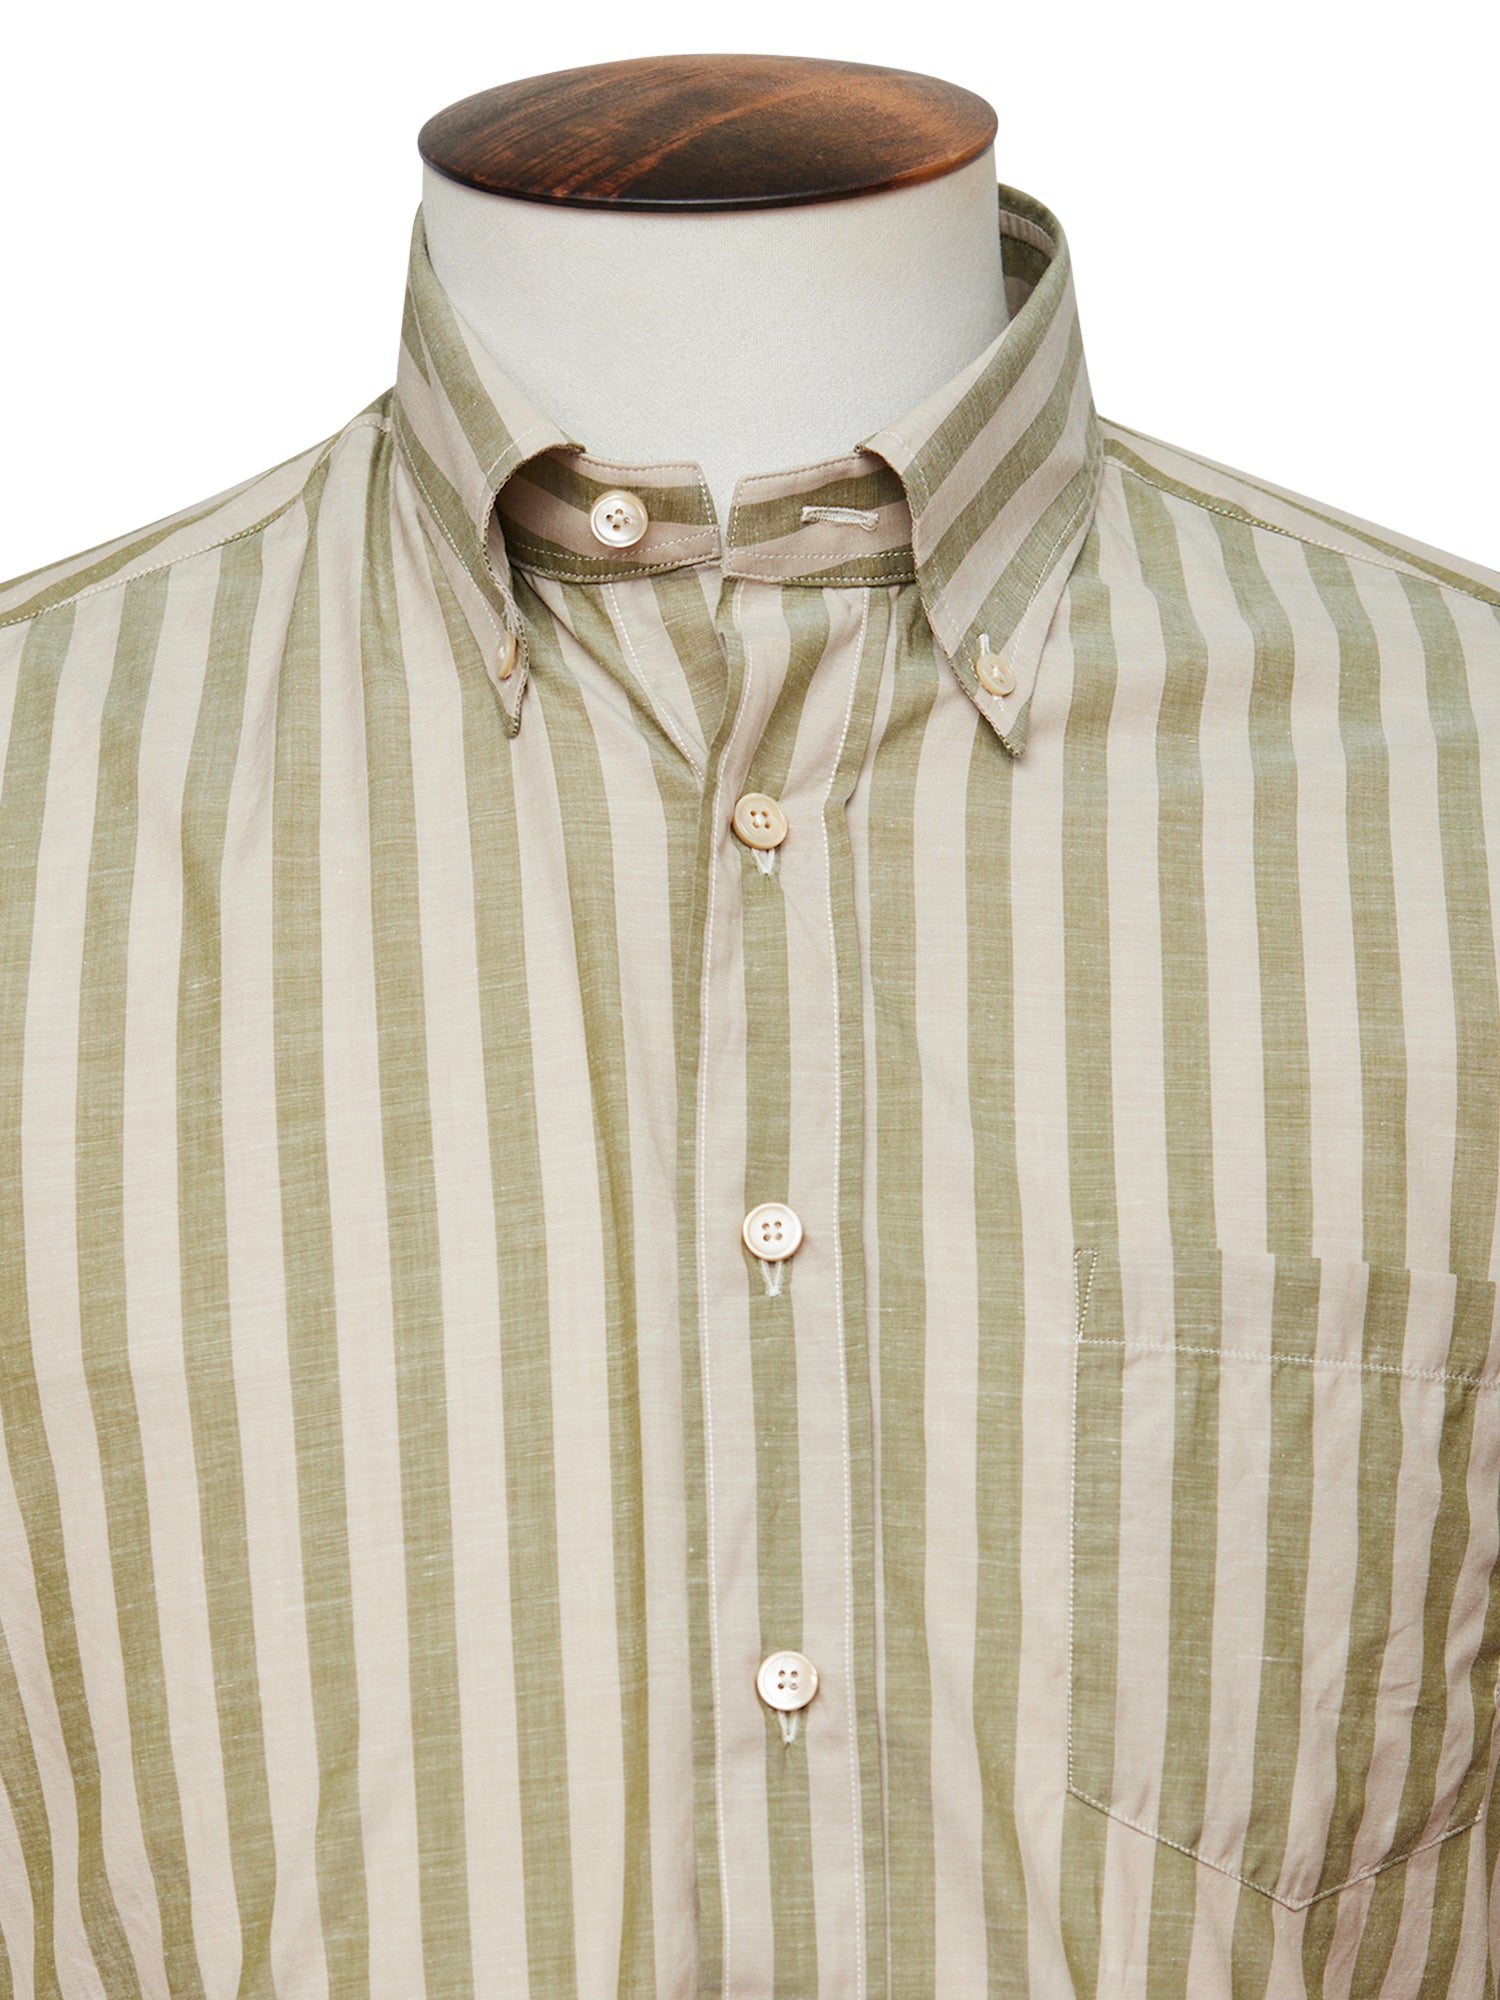 Soft Beige and Olive Stripe Button Down Shirt